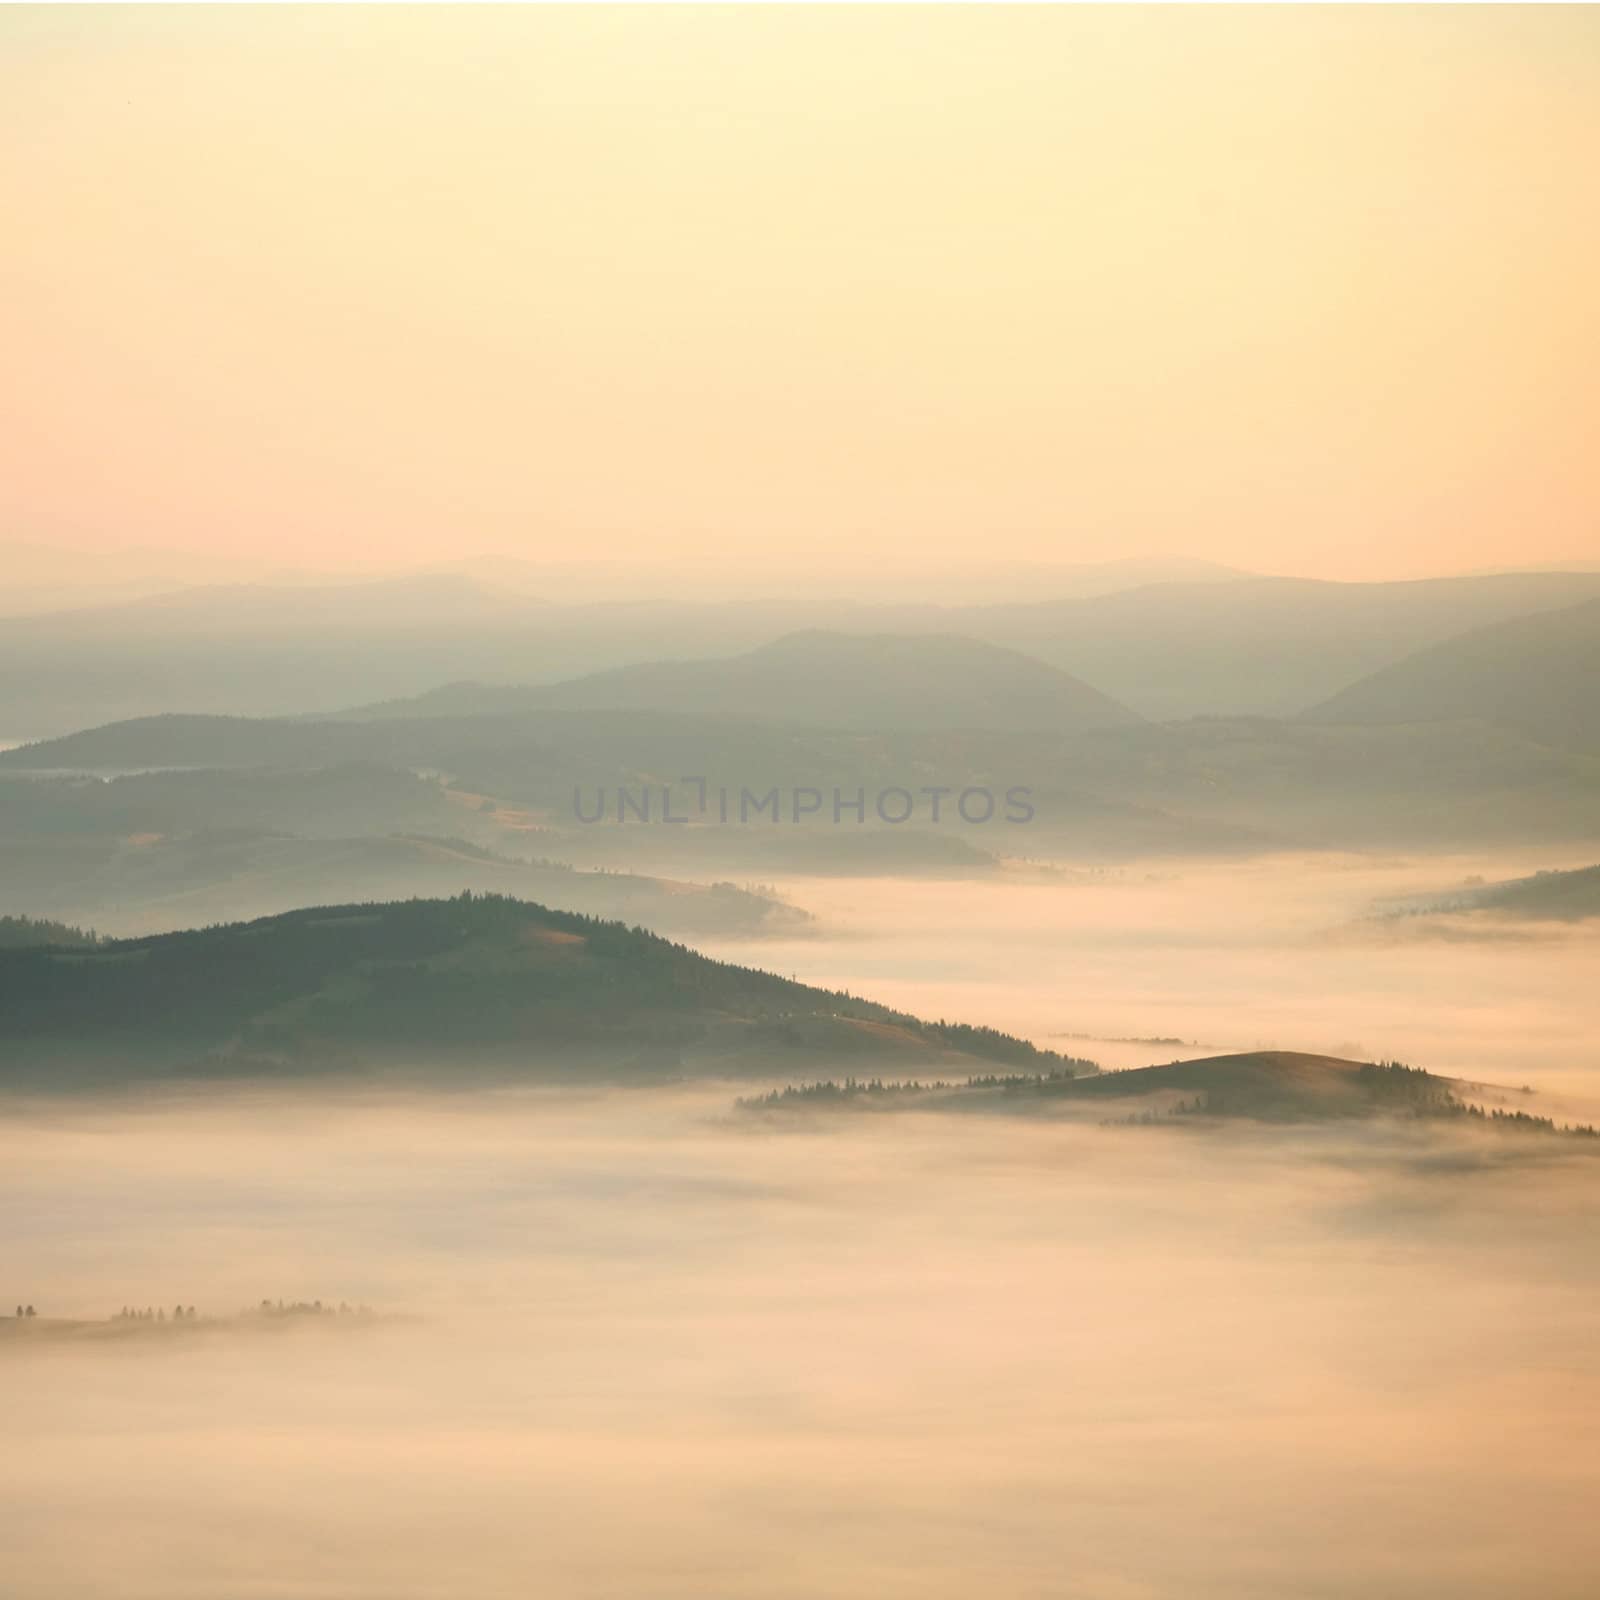 An image of yellow mist in the mountains